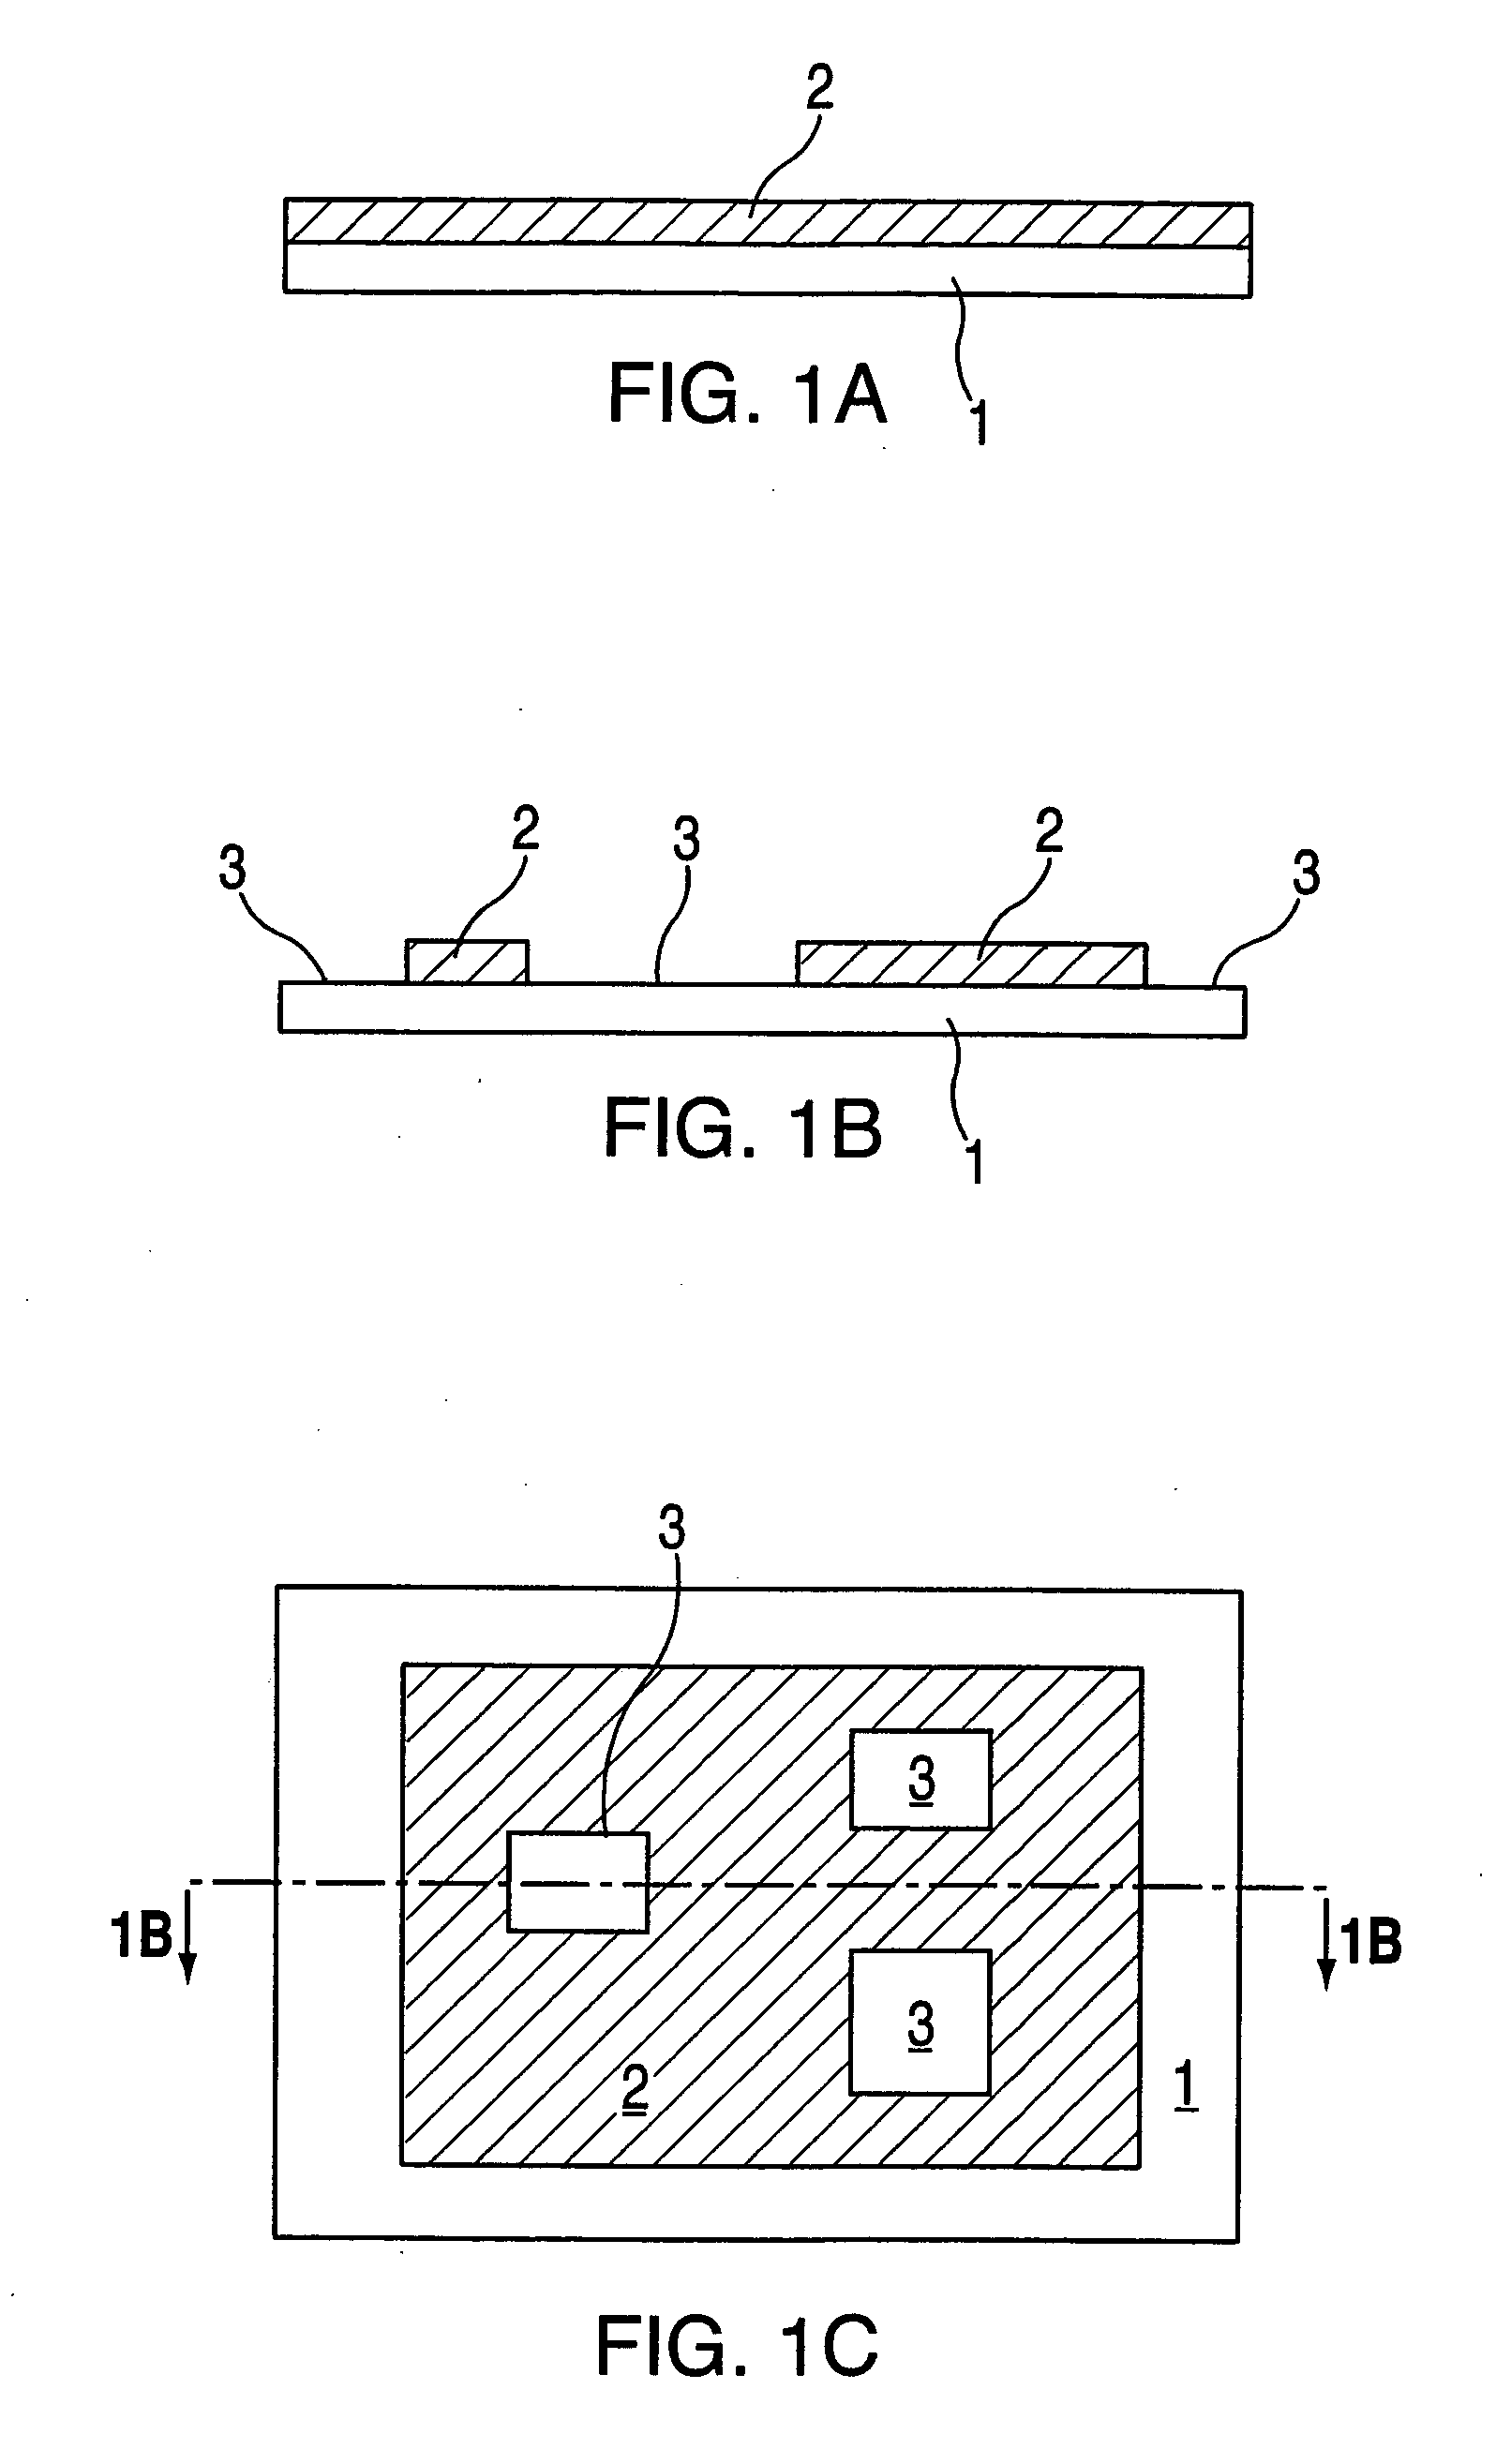 Gap tuning for surface micromachined structures in an epitaxial reactor